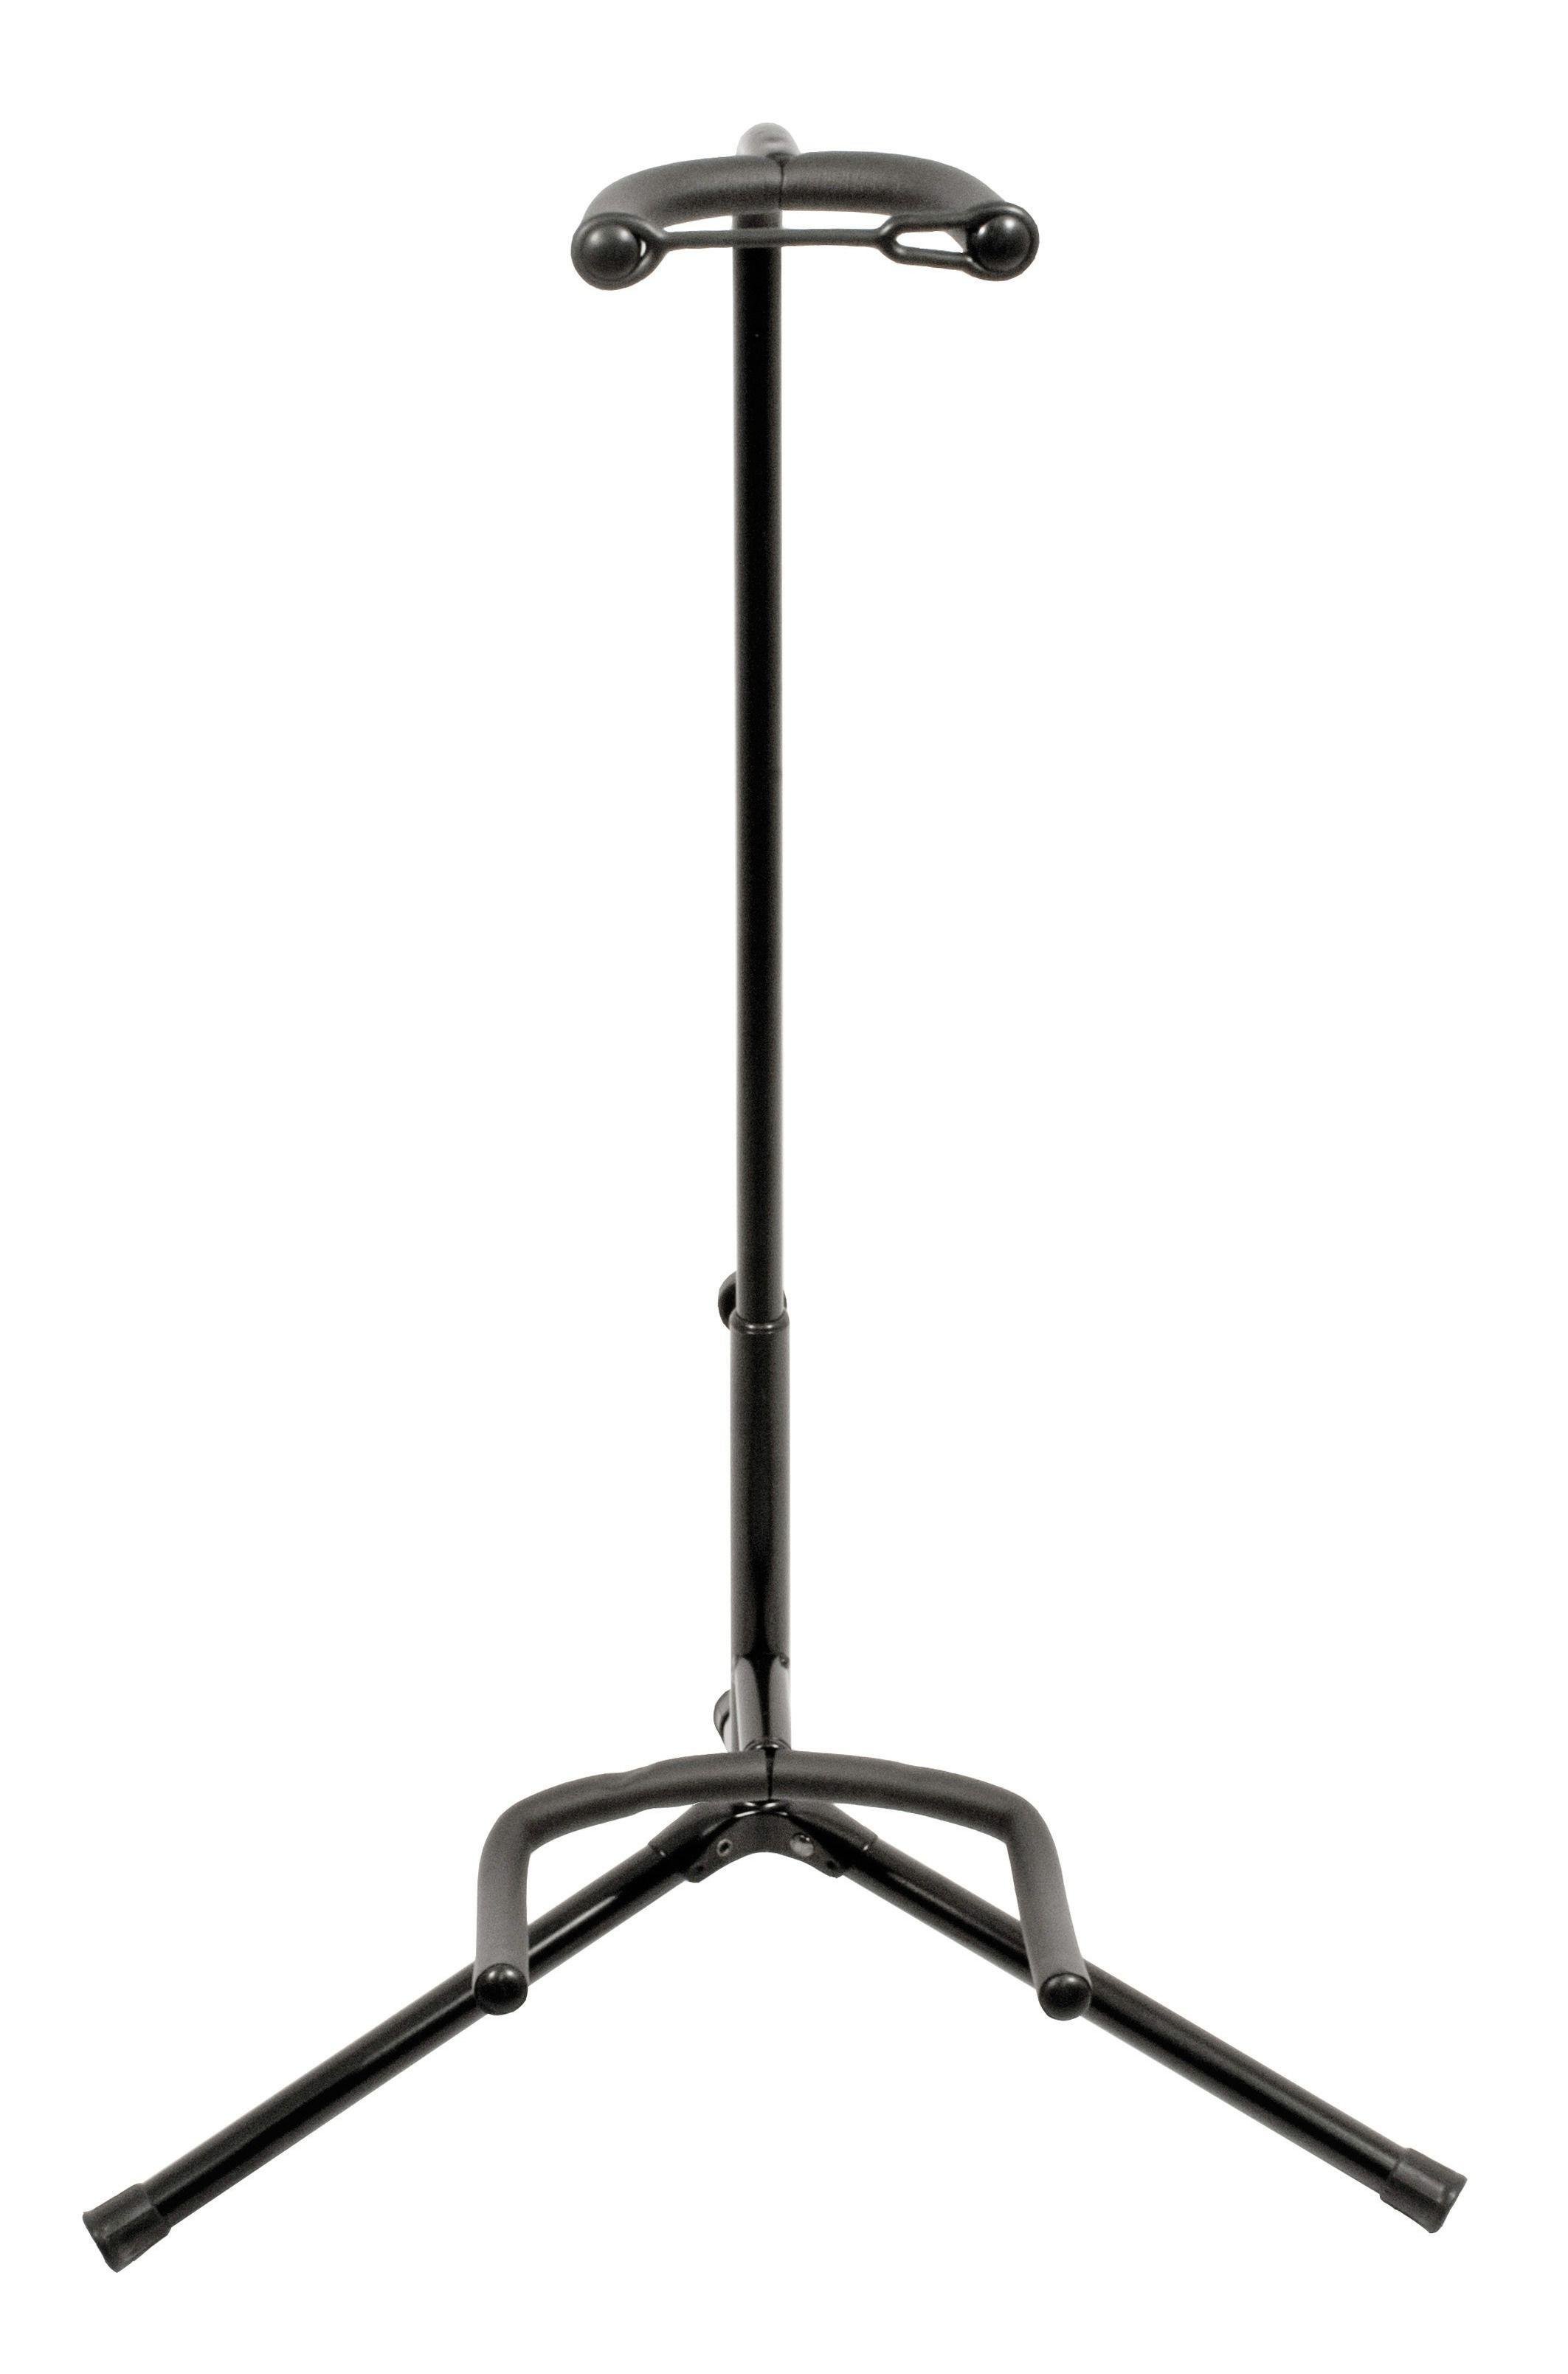 Universal Guitar Stand review